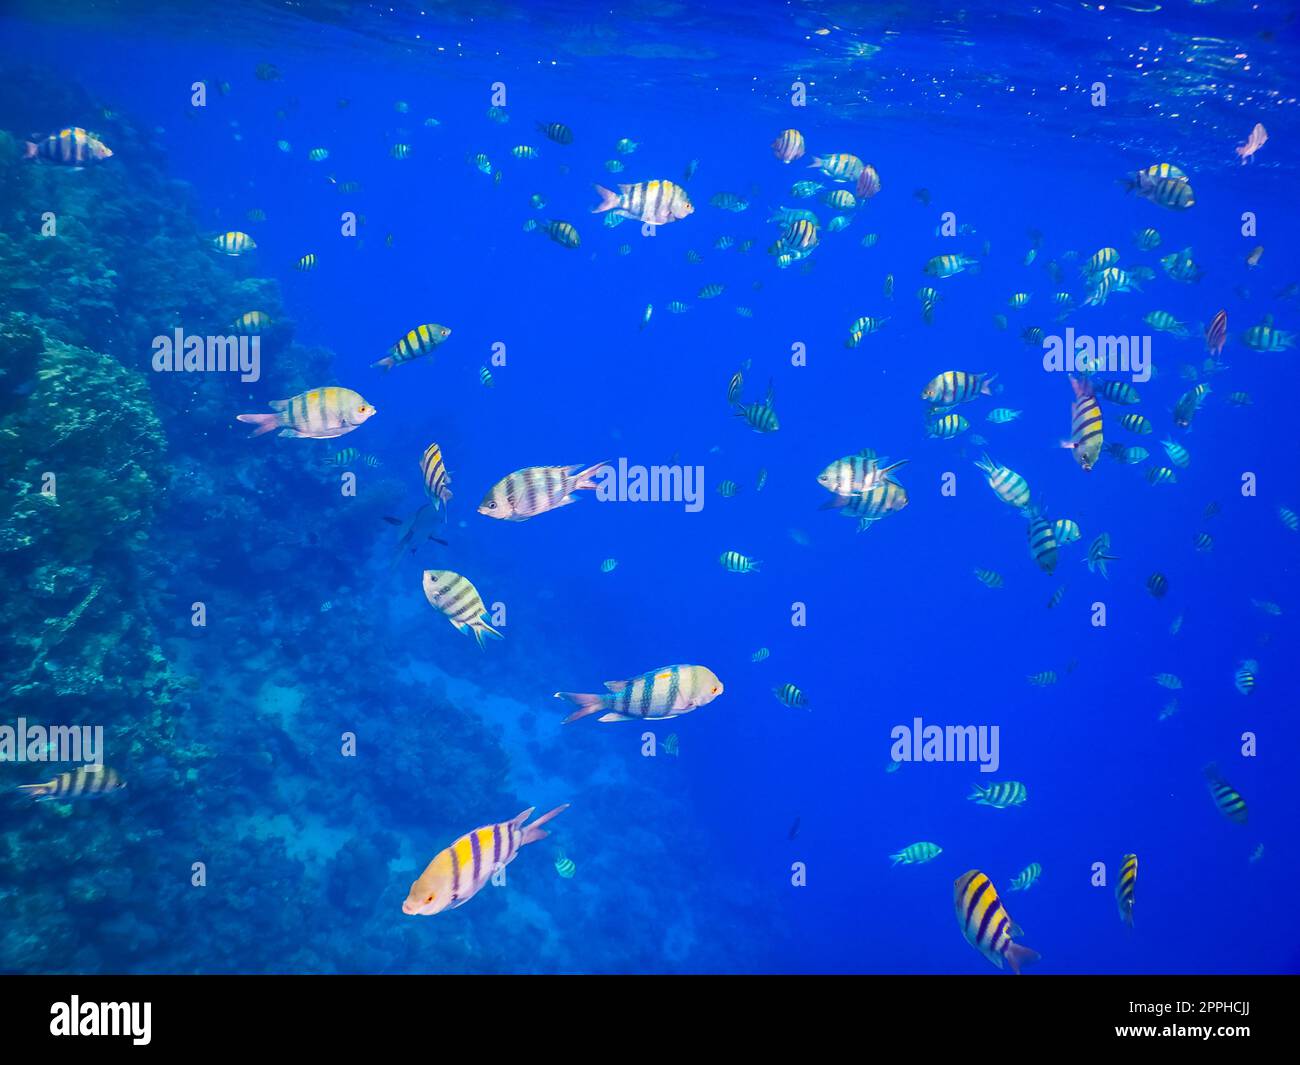 millions of indopazific sergeant fish in blue ocean Stock Photo